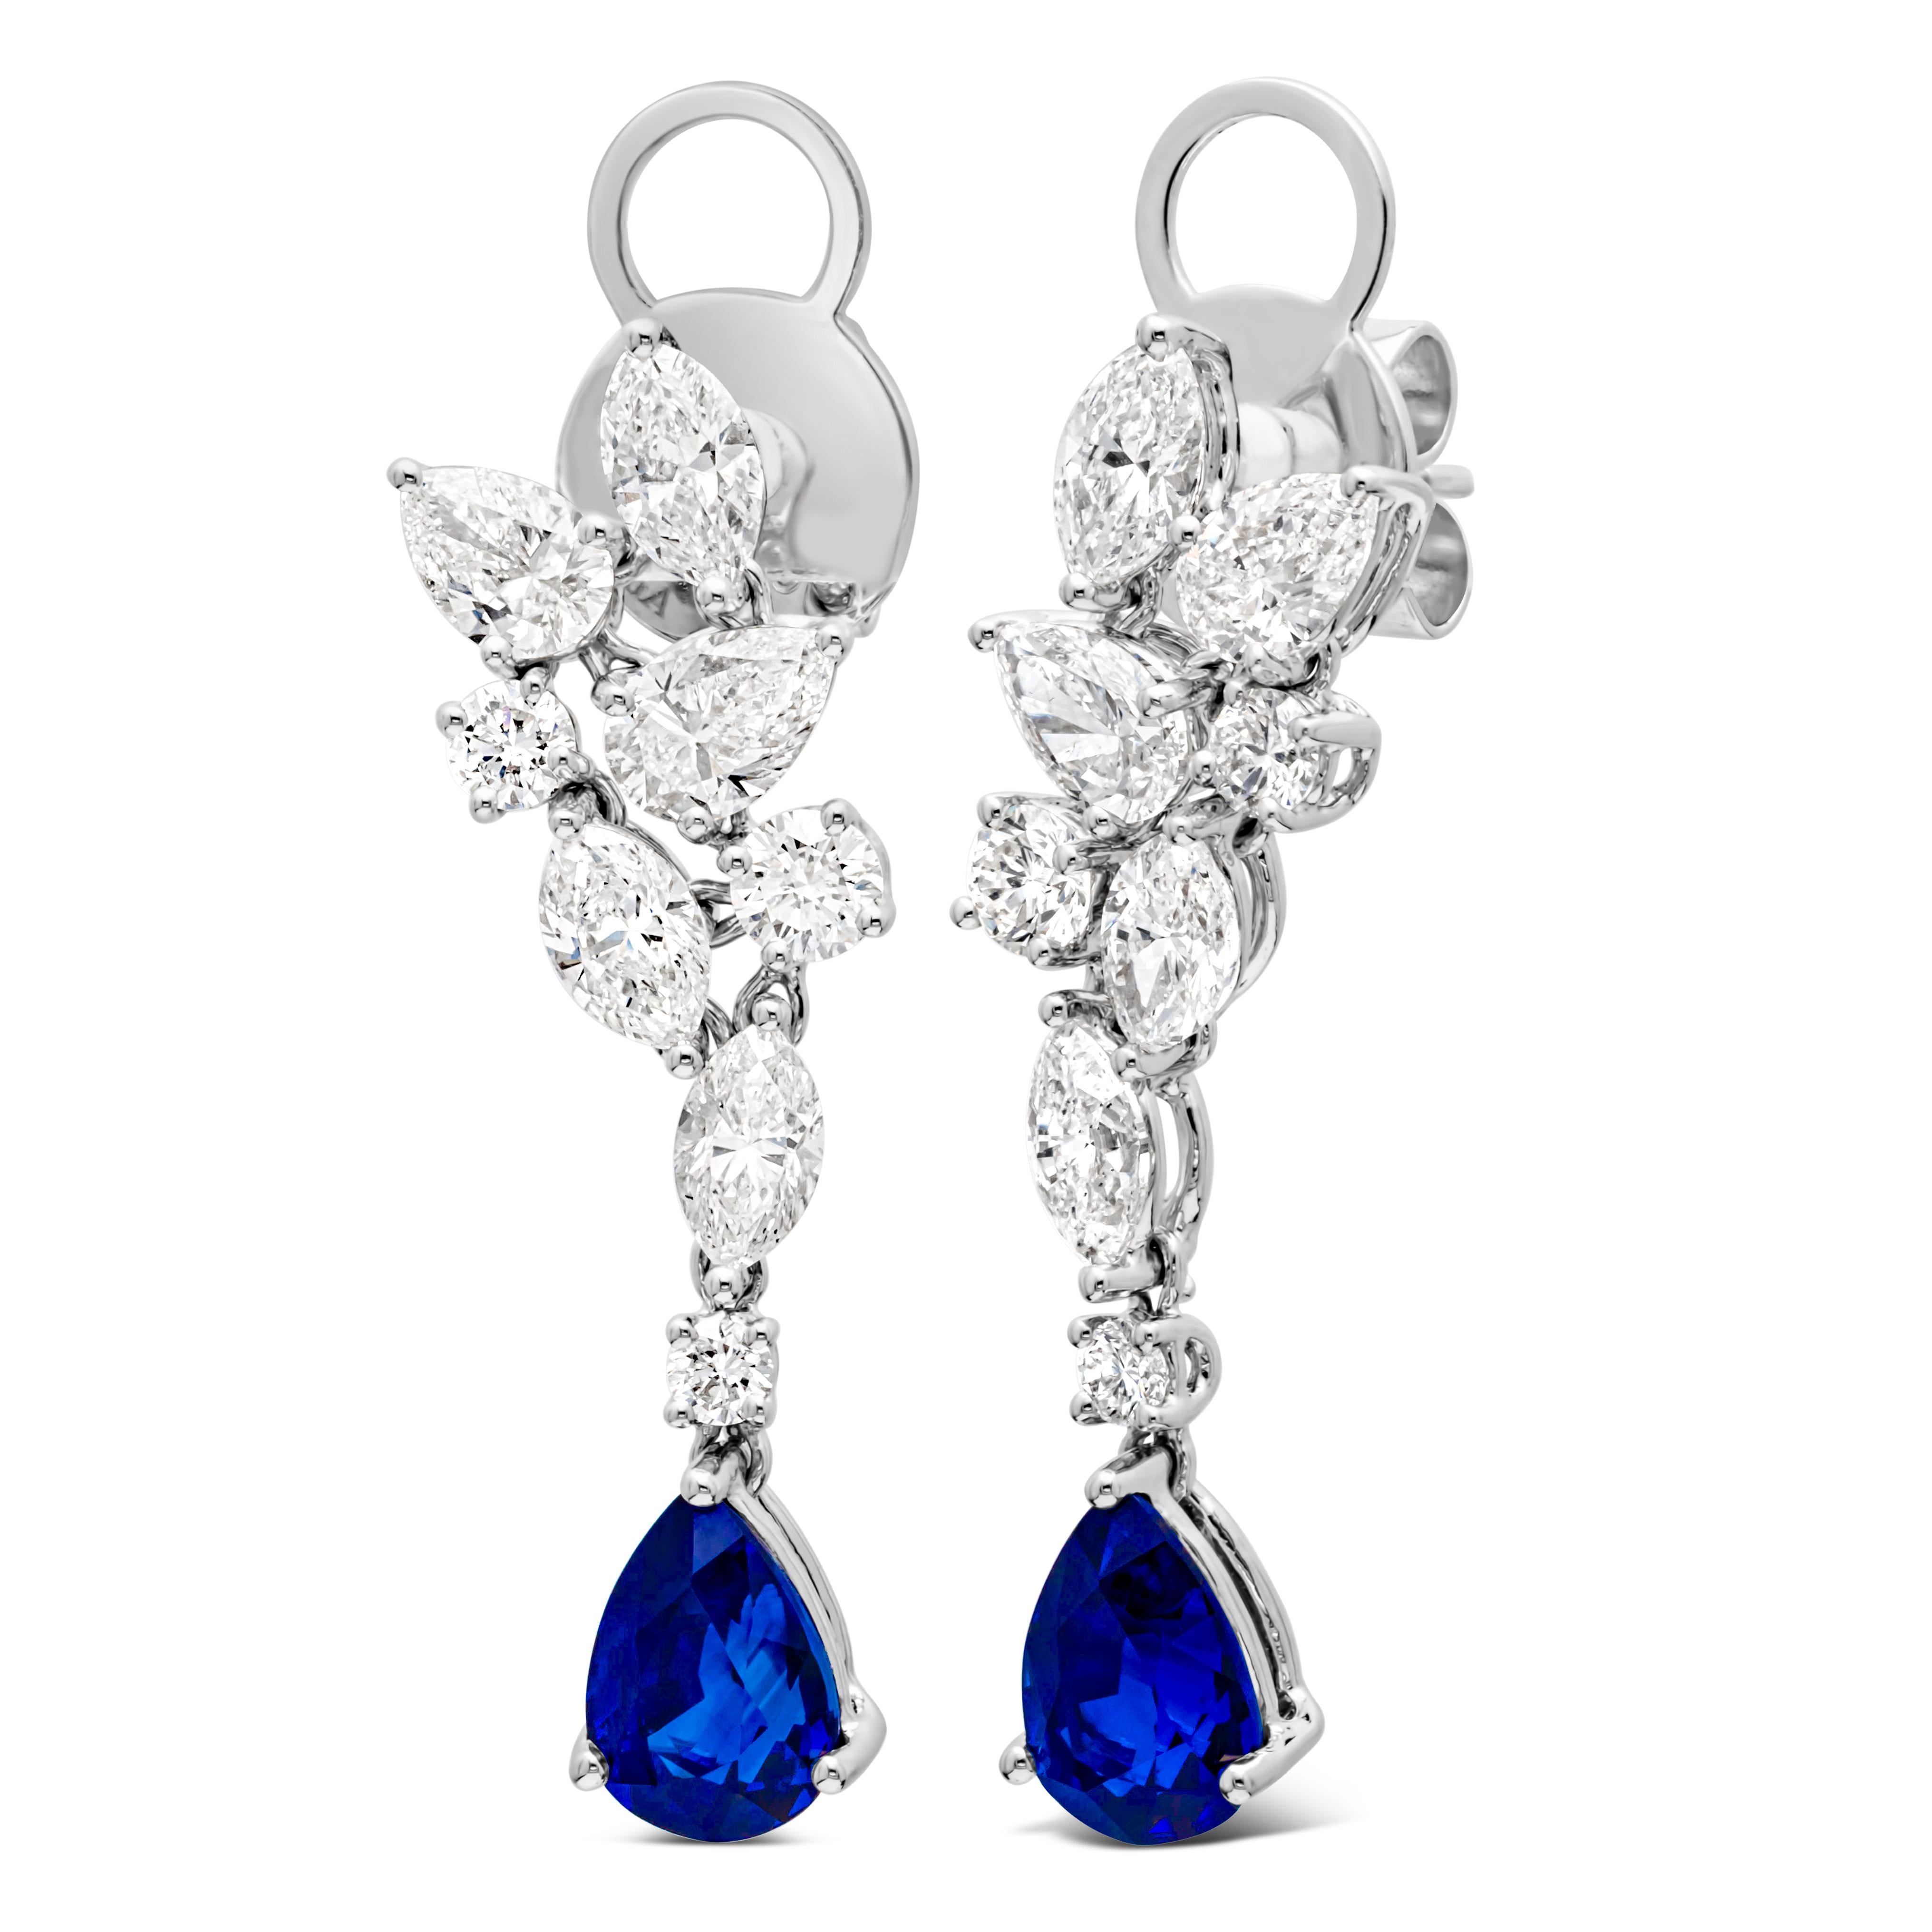 A sophisticated dangle earrings featuring a pear shape blue sapphire weighing 3.03 carats total, Elegantly set in a classic three prong basket setting and suspended on a cluster of pear, marquis and round shape diamonds weighing 3.13 carats total.